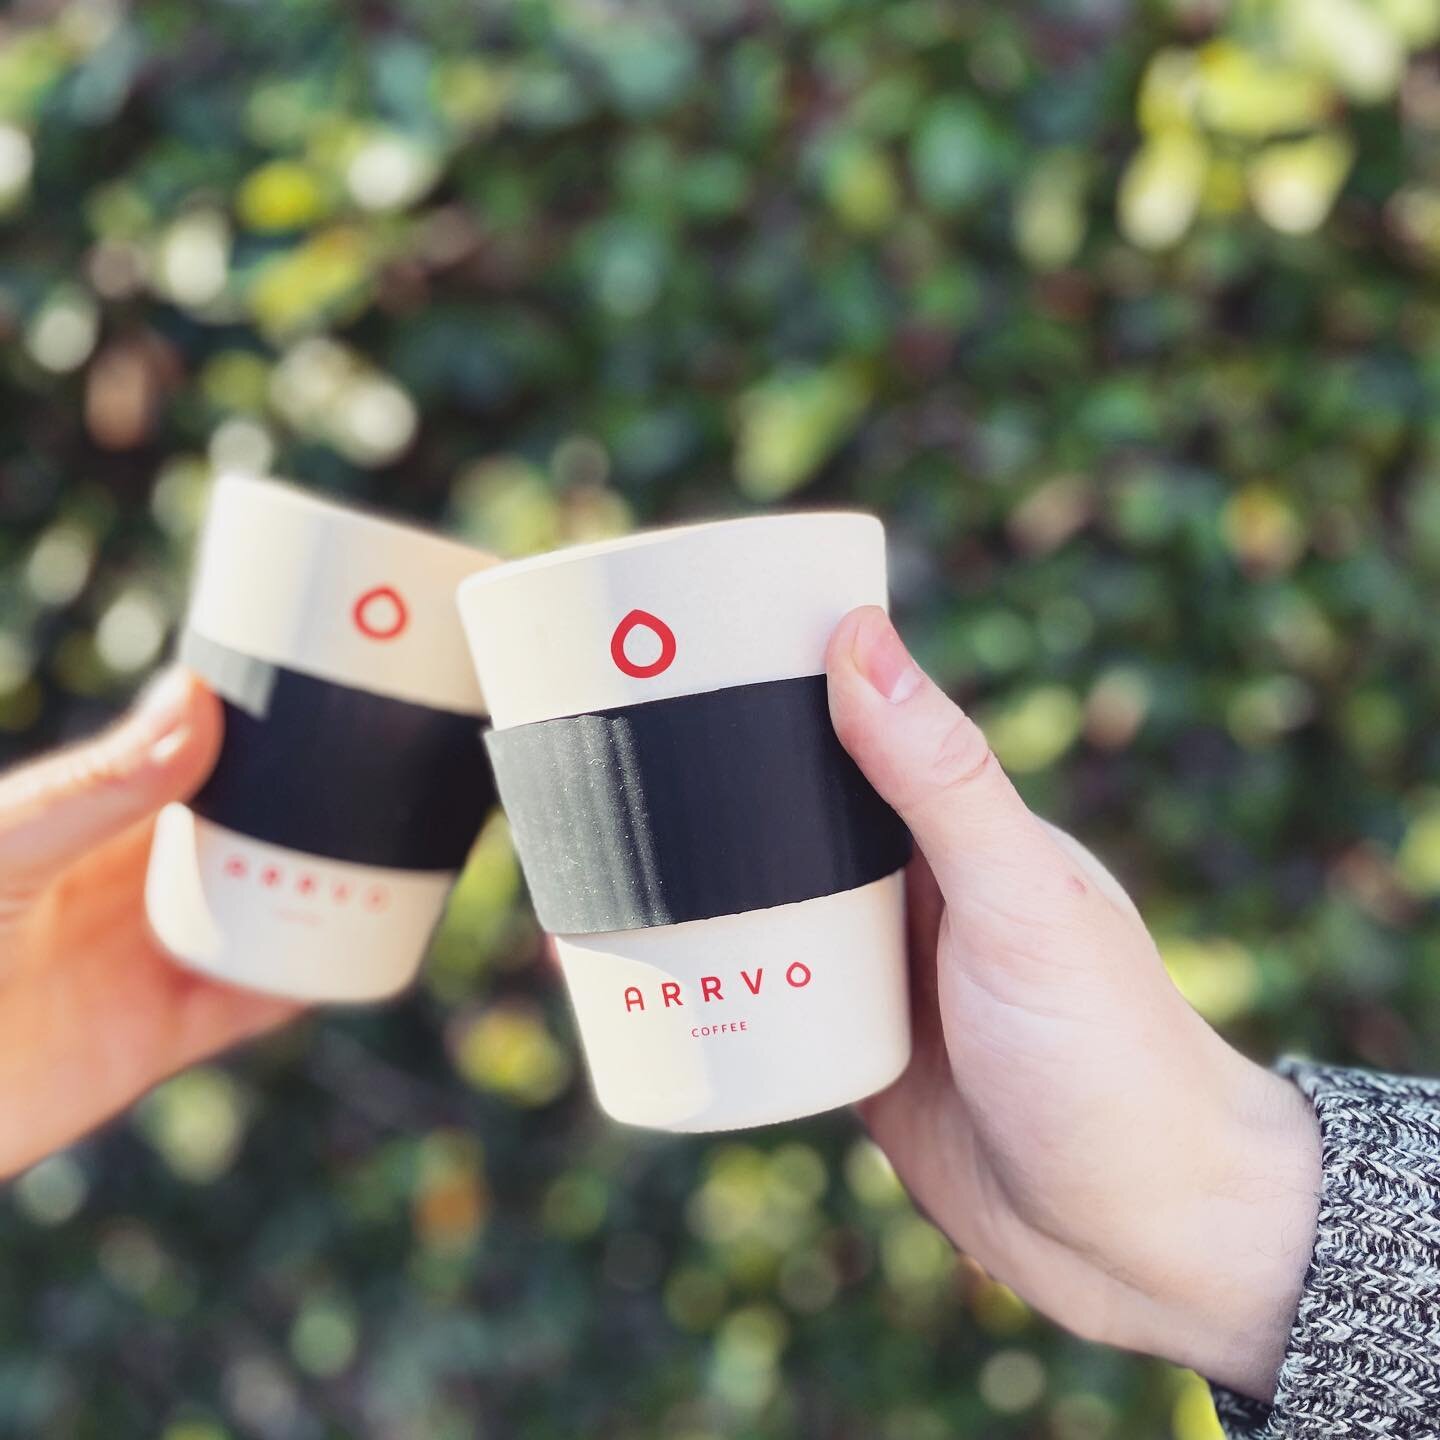 Cheers to Earth Day! 🌎 🌱 We are doing our part by using only compostable takeaways on all of our bars! Enjoying our new sustainable upcycled cups from @ecoffeecup_us!☕️🤩
.
.
.
.
#arrvo #coffee #losangeles #california #smallbusiness #catering #mobi